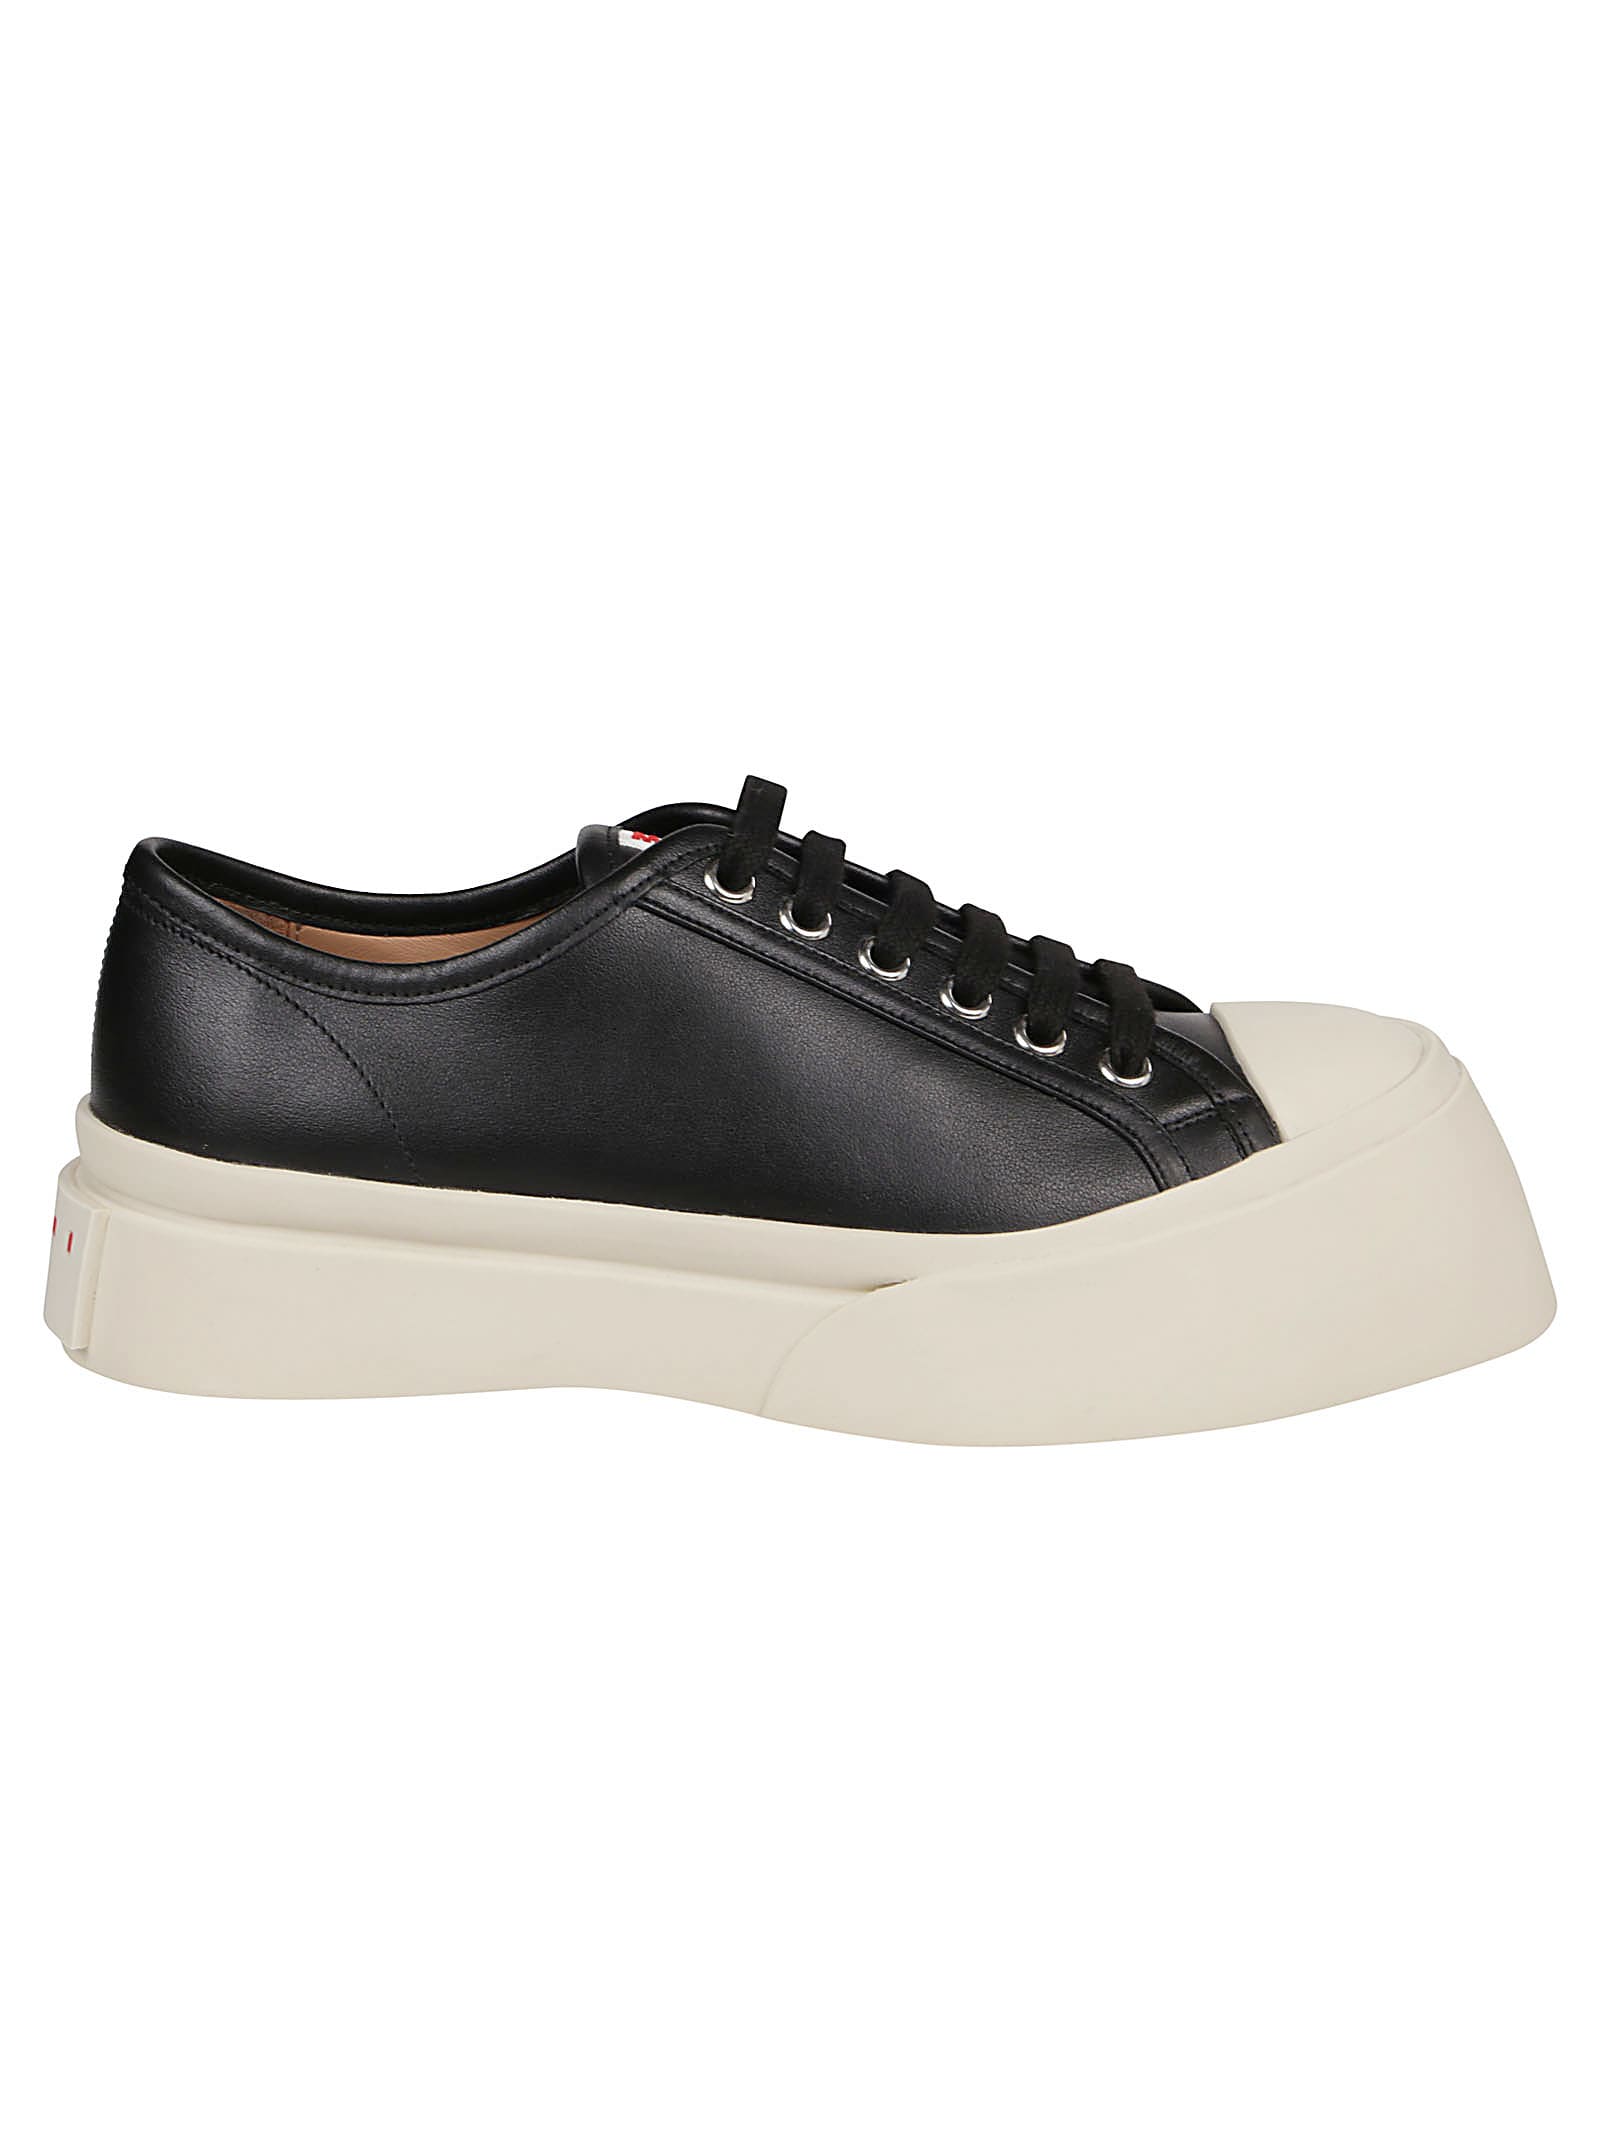 Marni Laced Up Pablo Sneakers